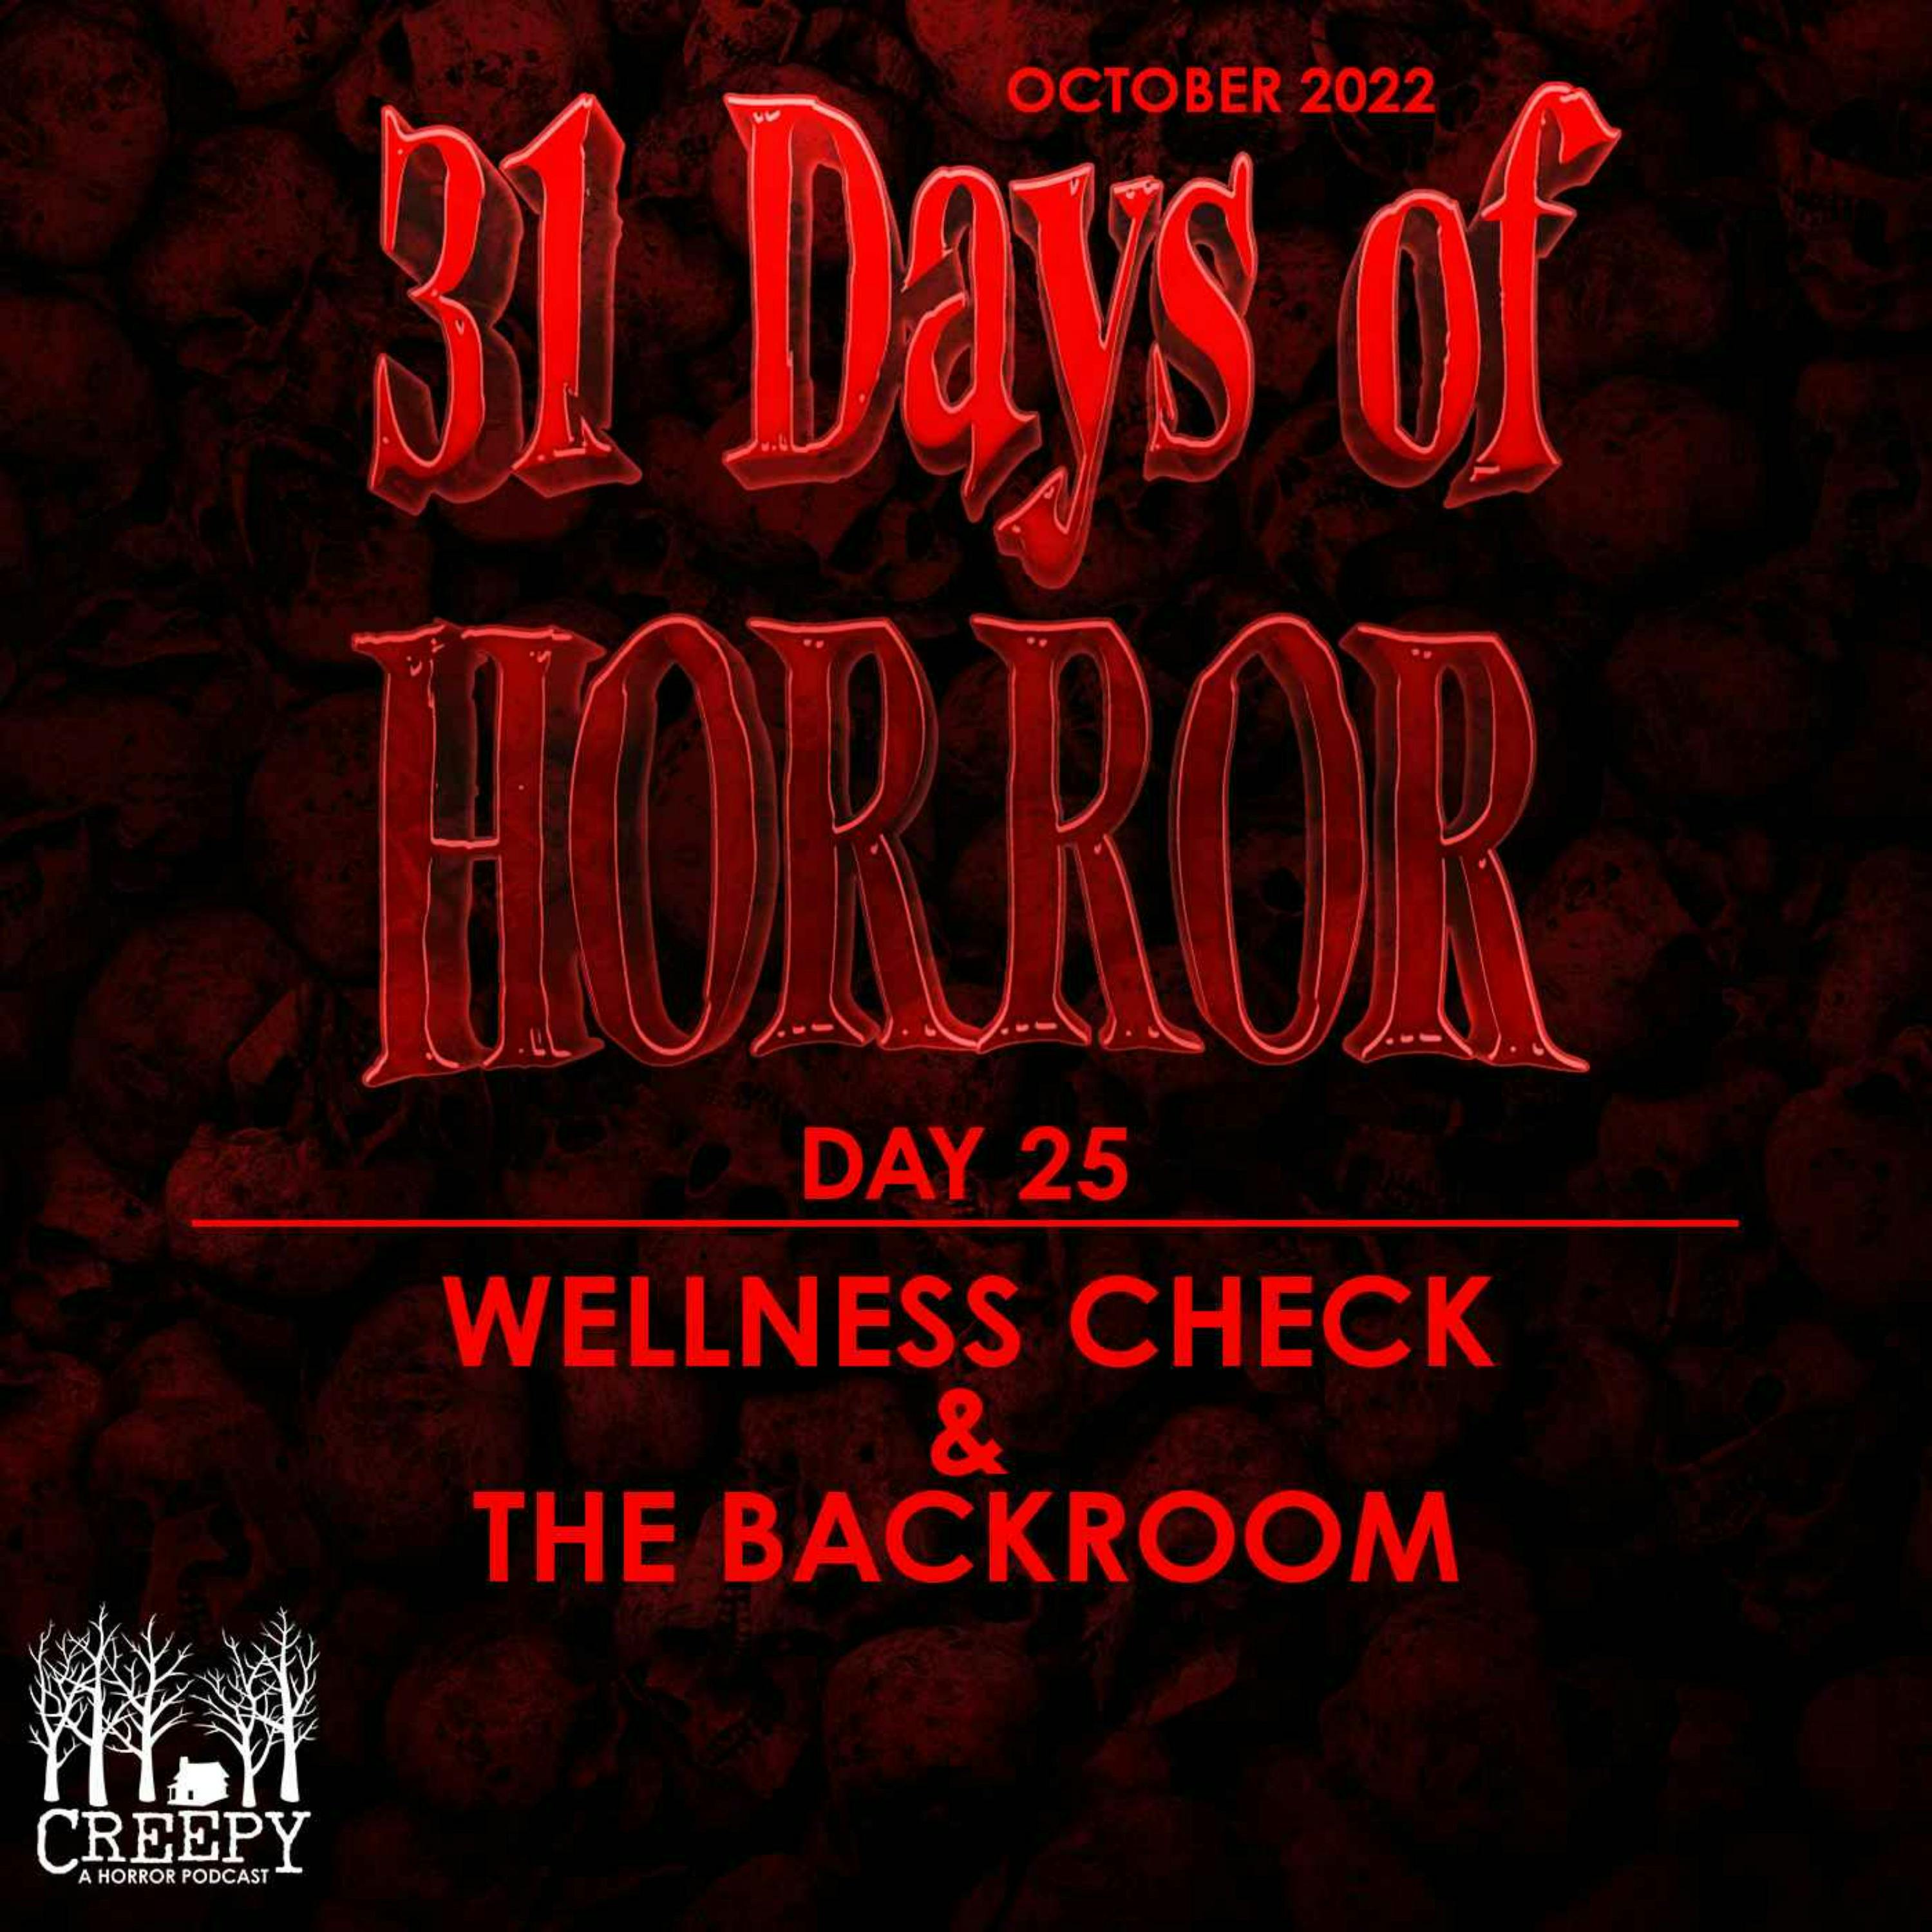 Day 25 - Wellness Check & The Backrooms